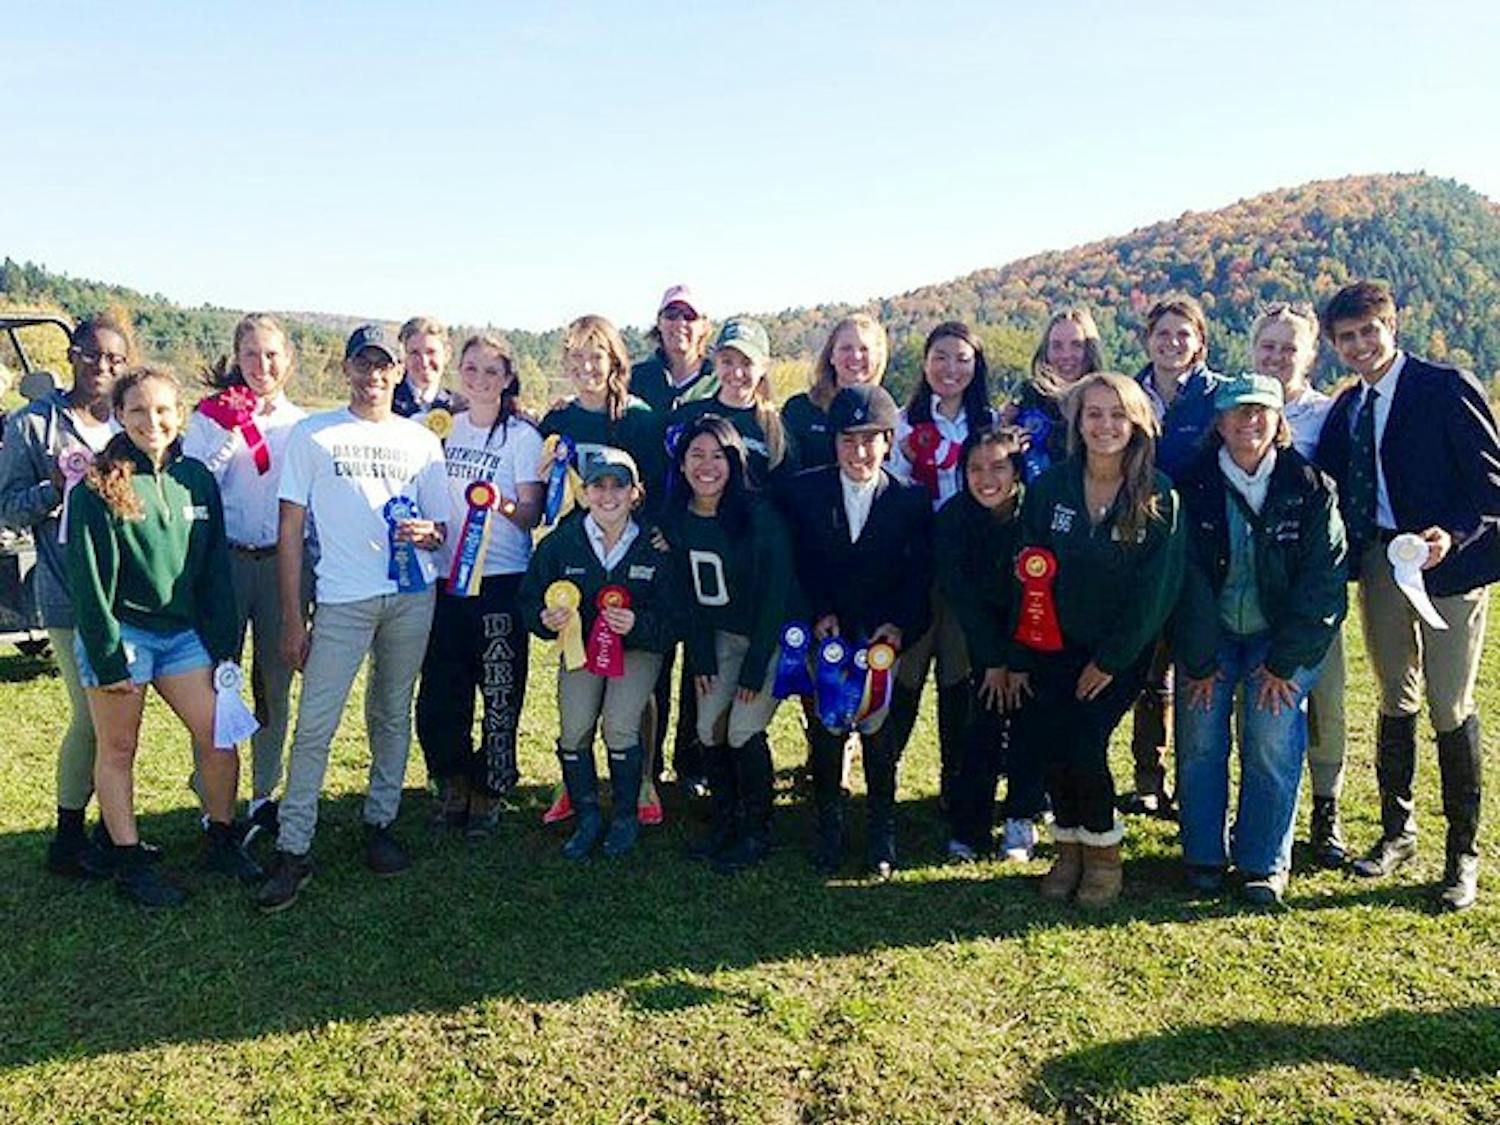 The equestrian team came within three points of a perfect set at their competition on Saturday.